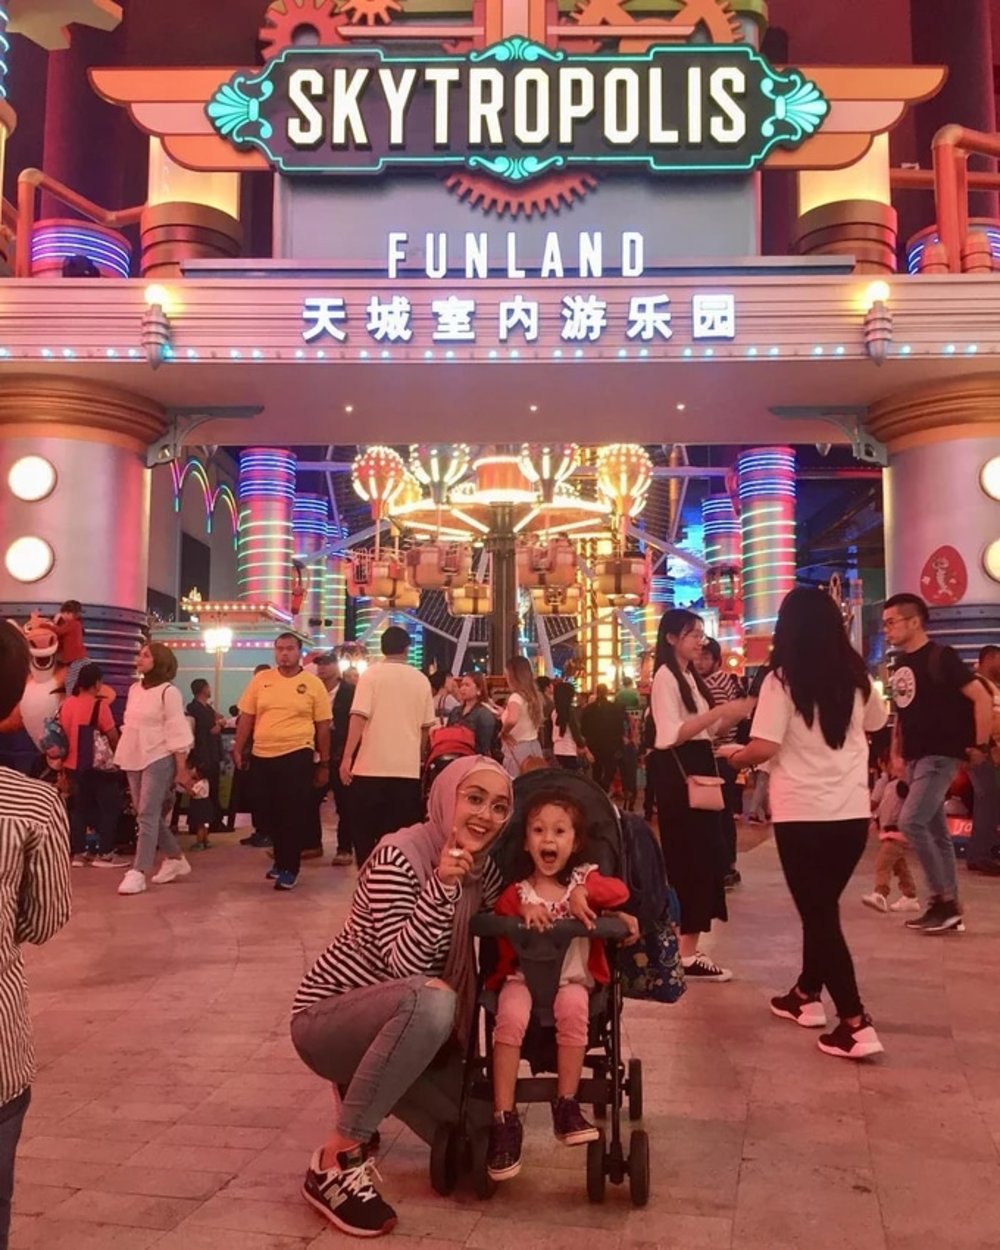 reasons to visit genting highlands